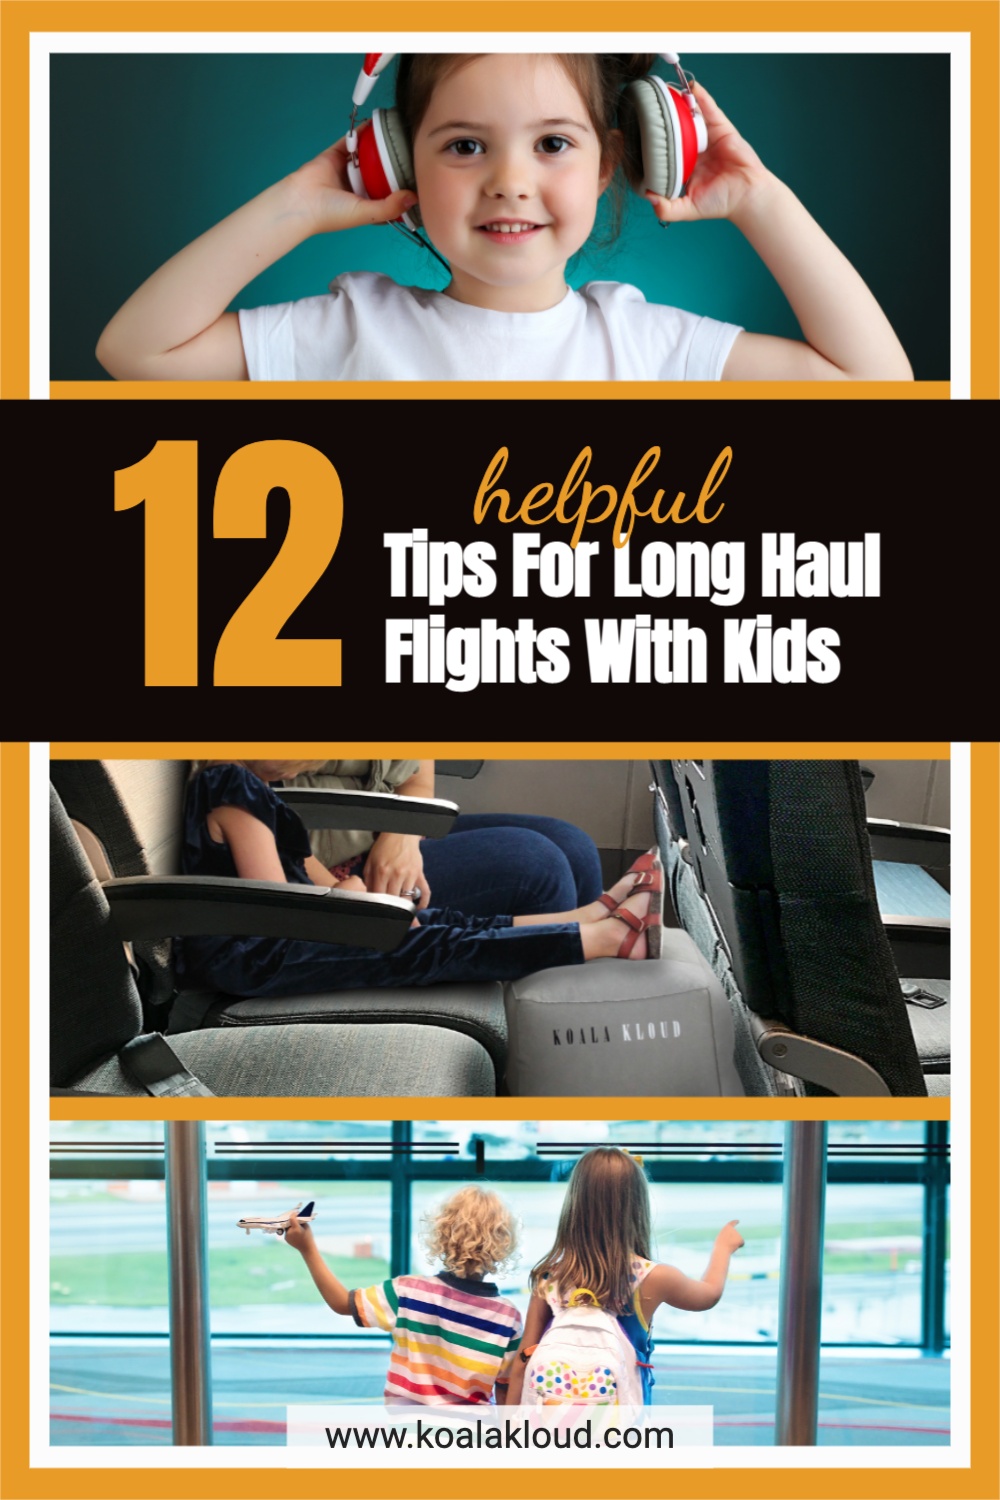 12-Tips-For-Long-Haul-Flights-With-Kids